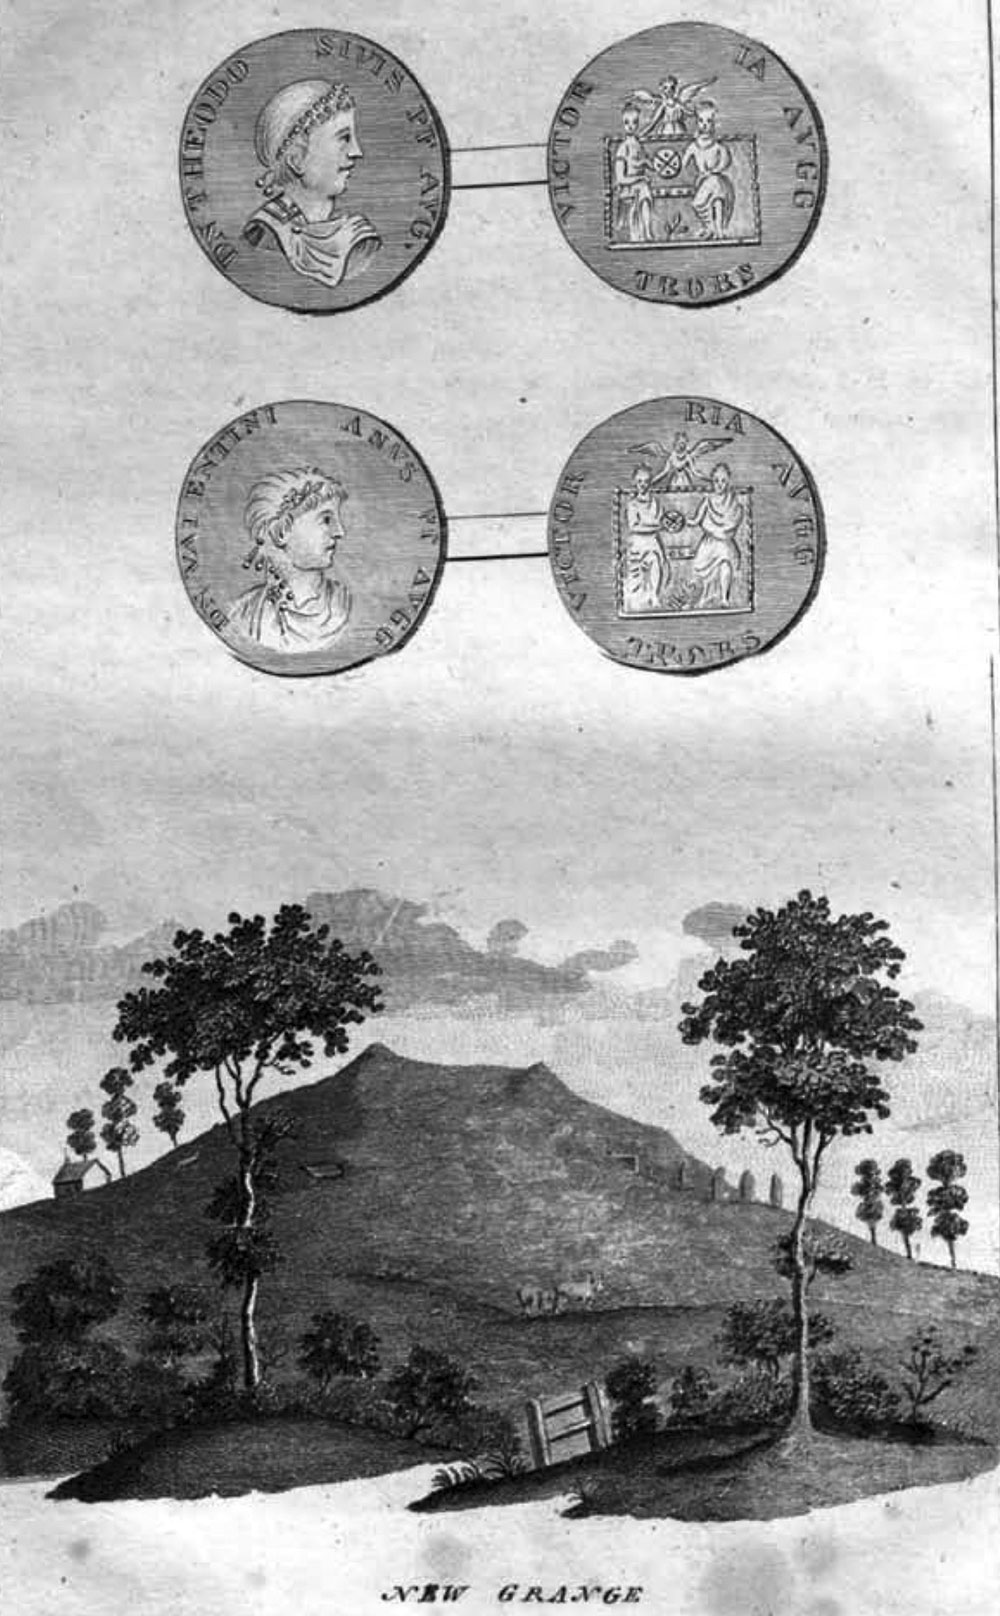 Illustration of Newgrange from Antiquities of Ireland by Edward Ledwich, published in 1790, showing some of the Roman coins found on the mound.